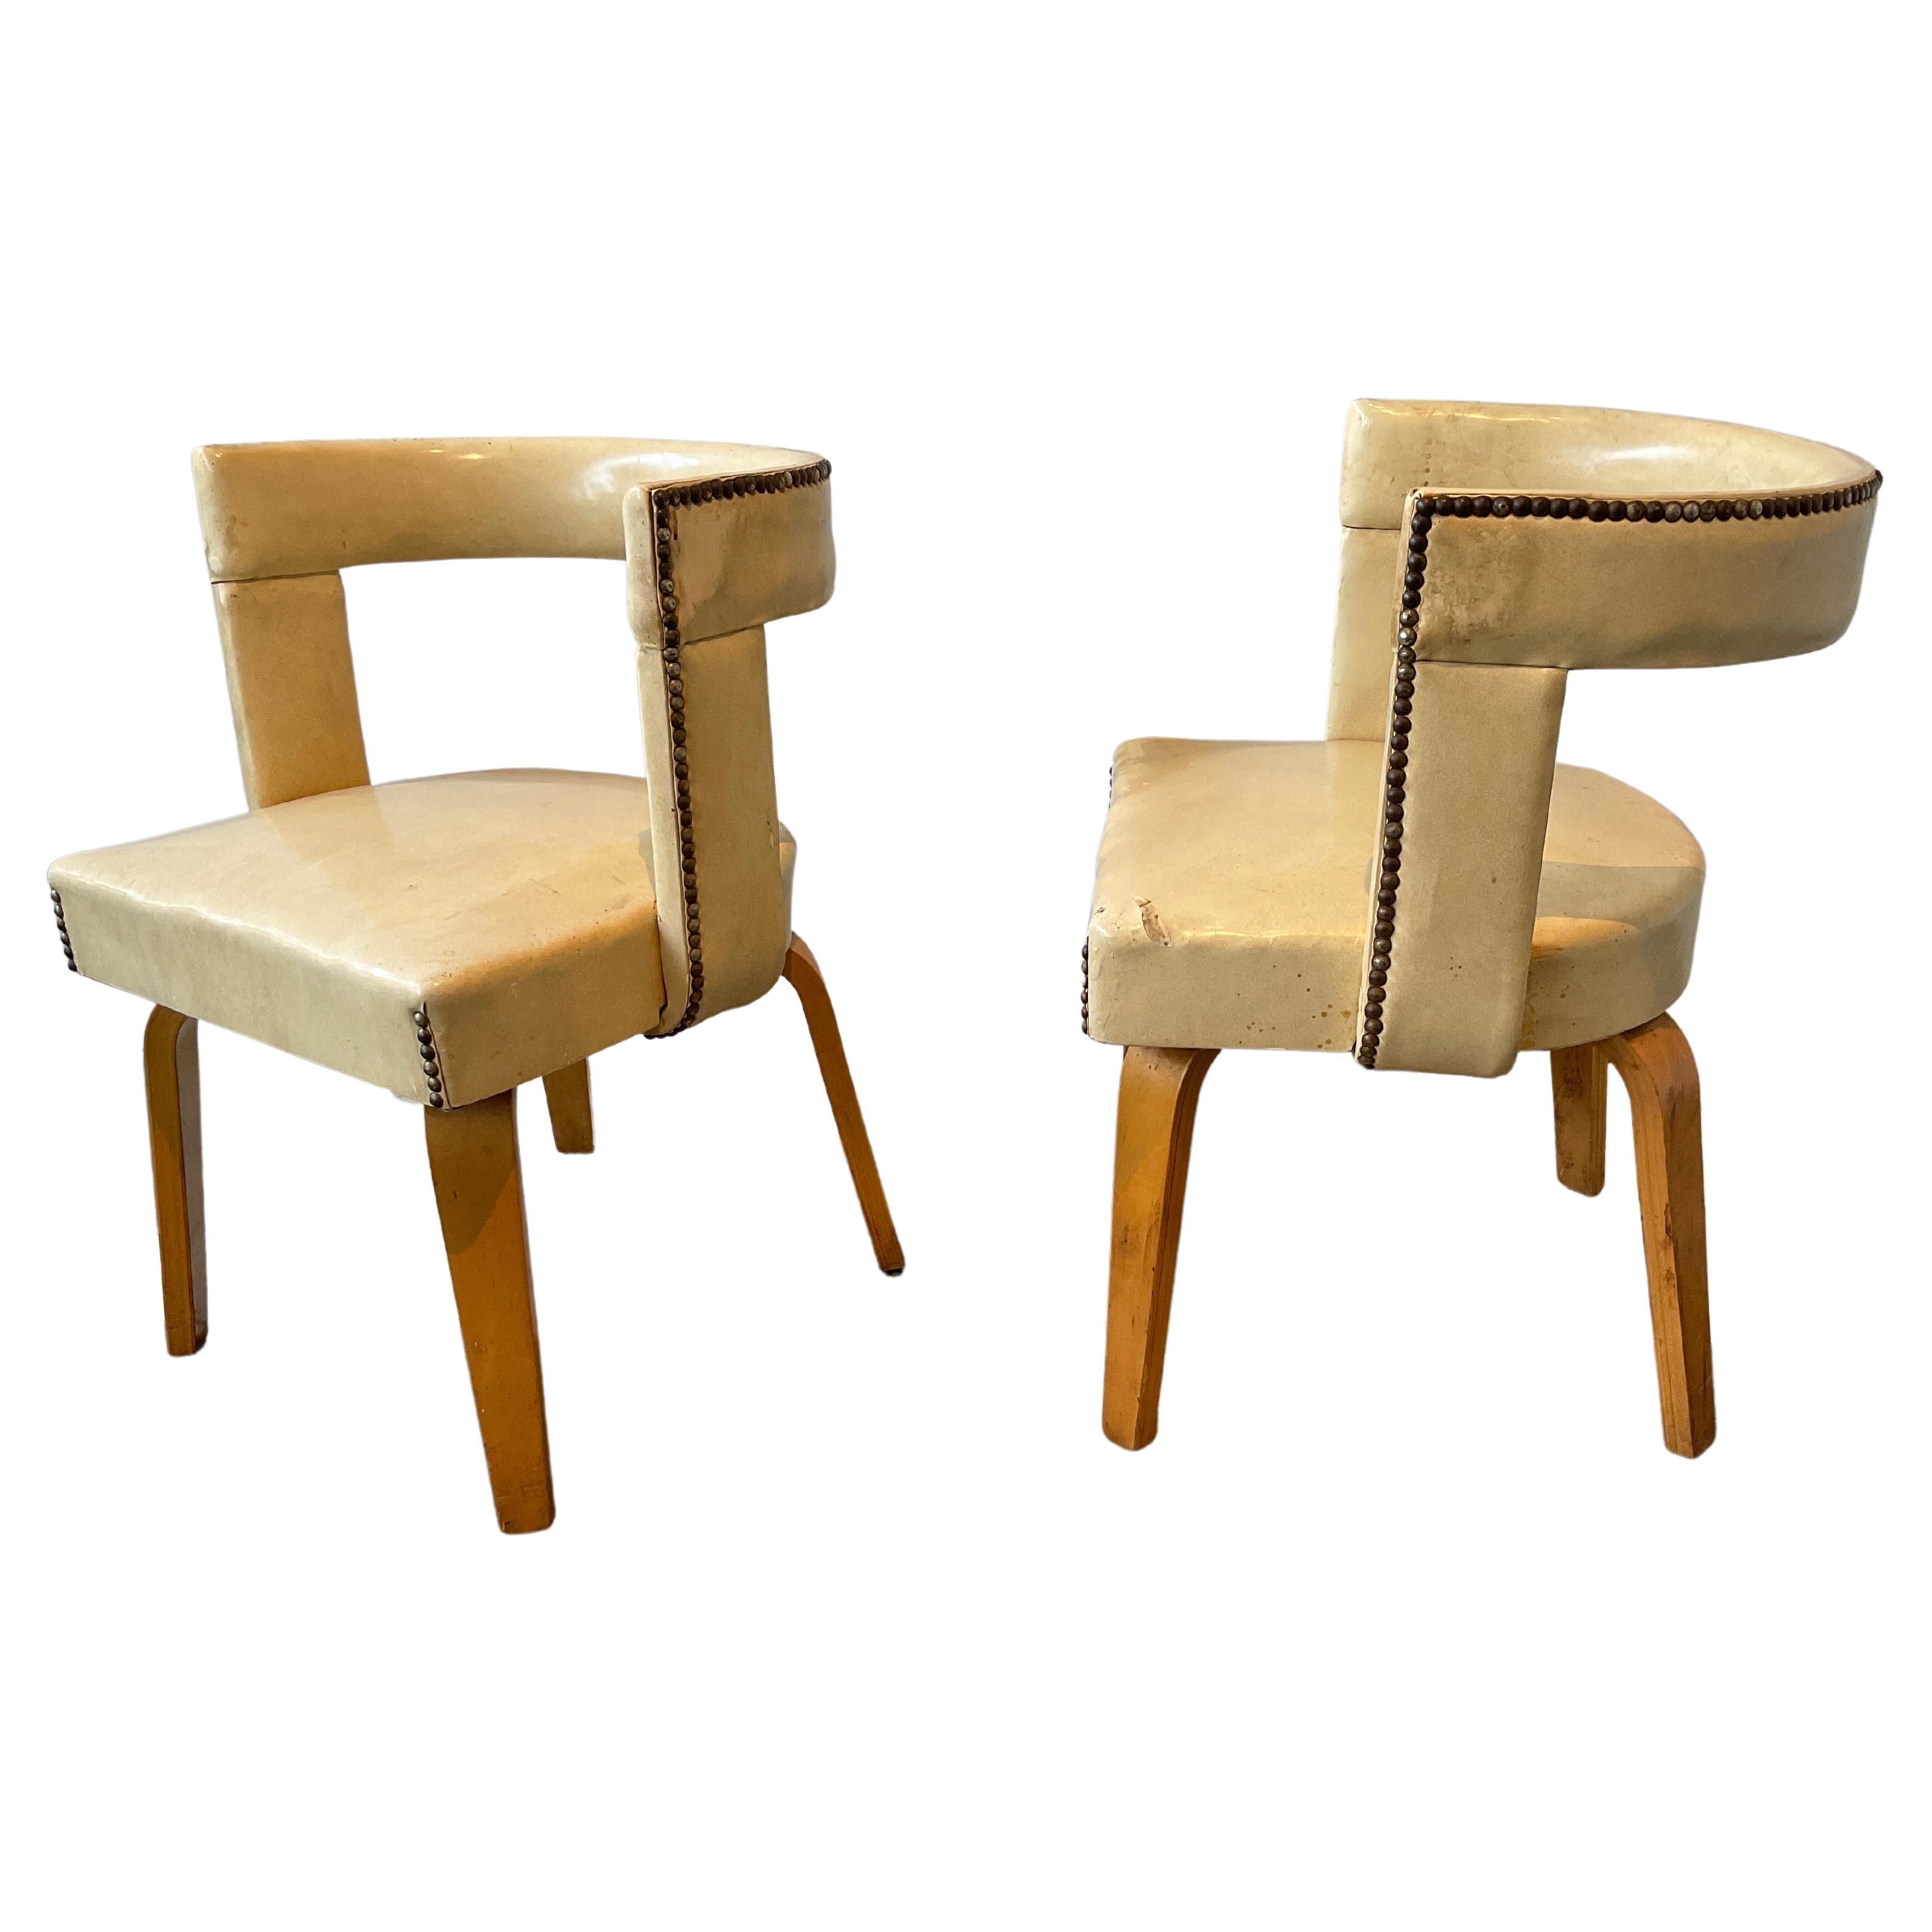 Pair of Architectural Thonet Chairs